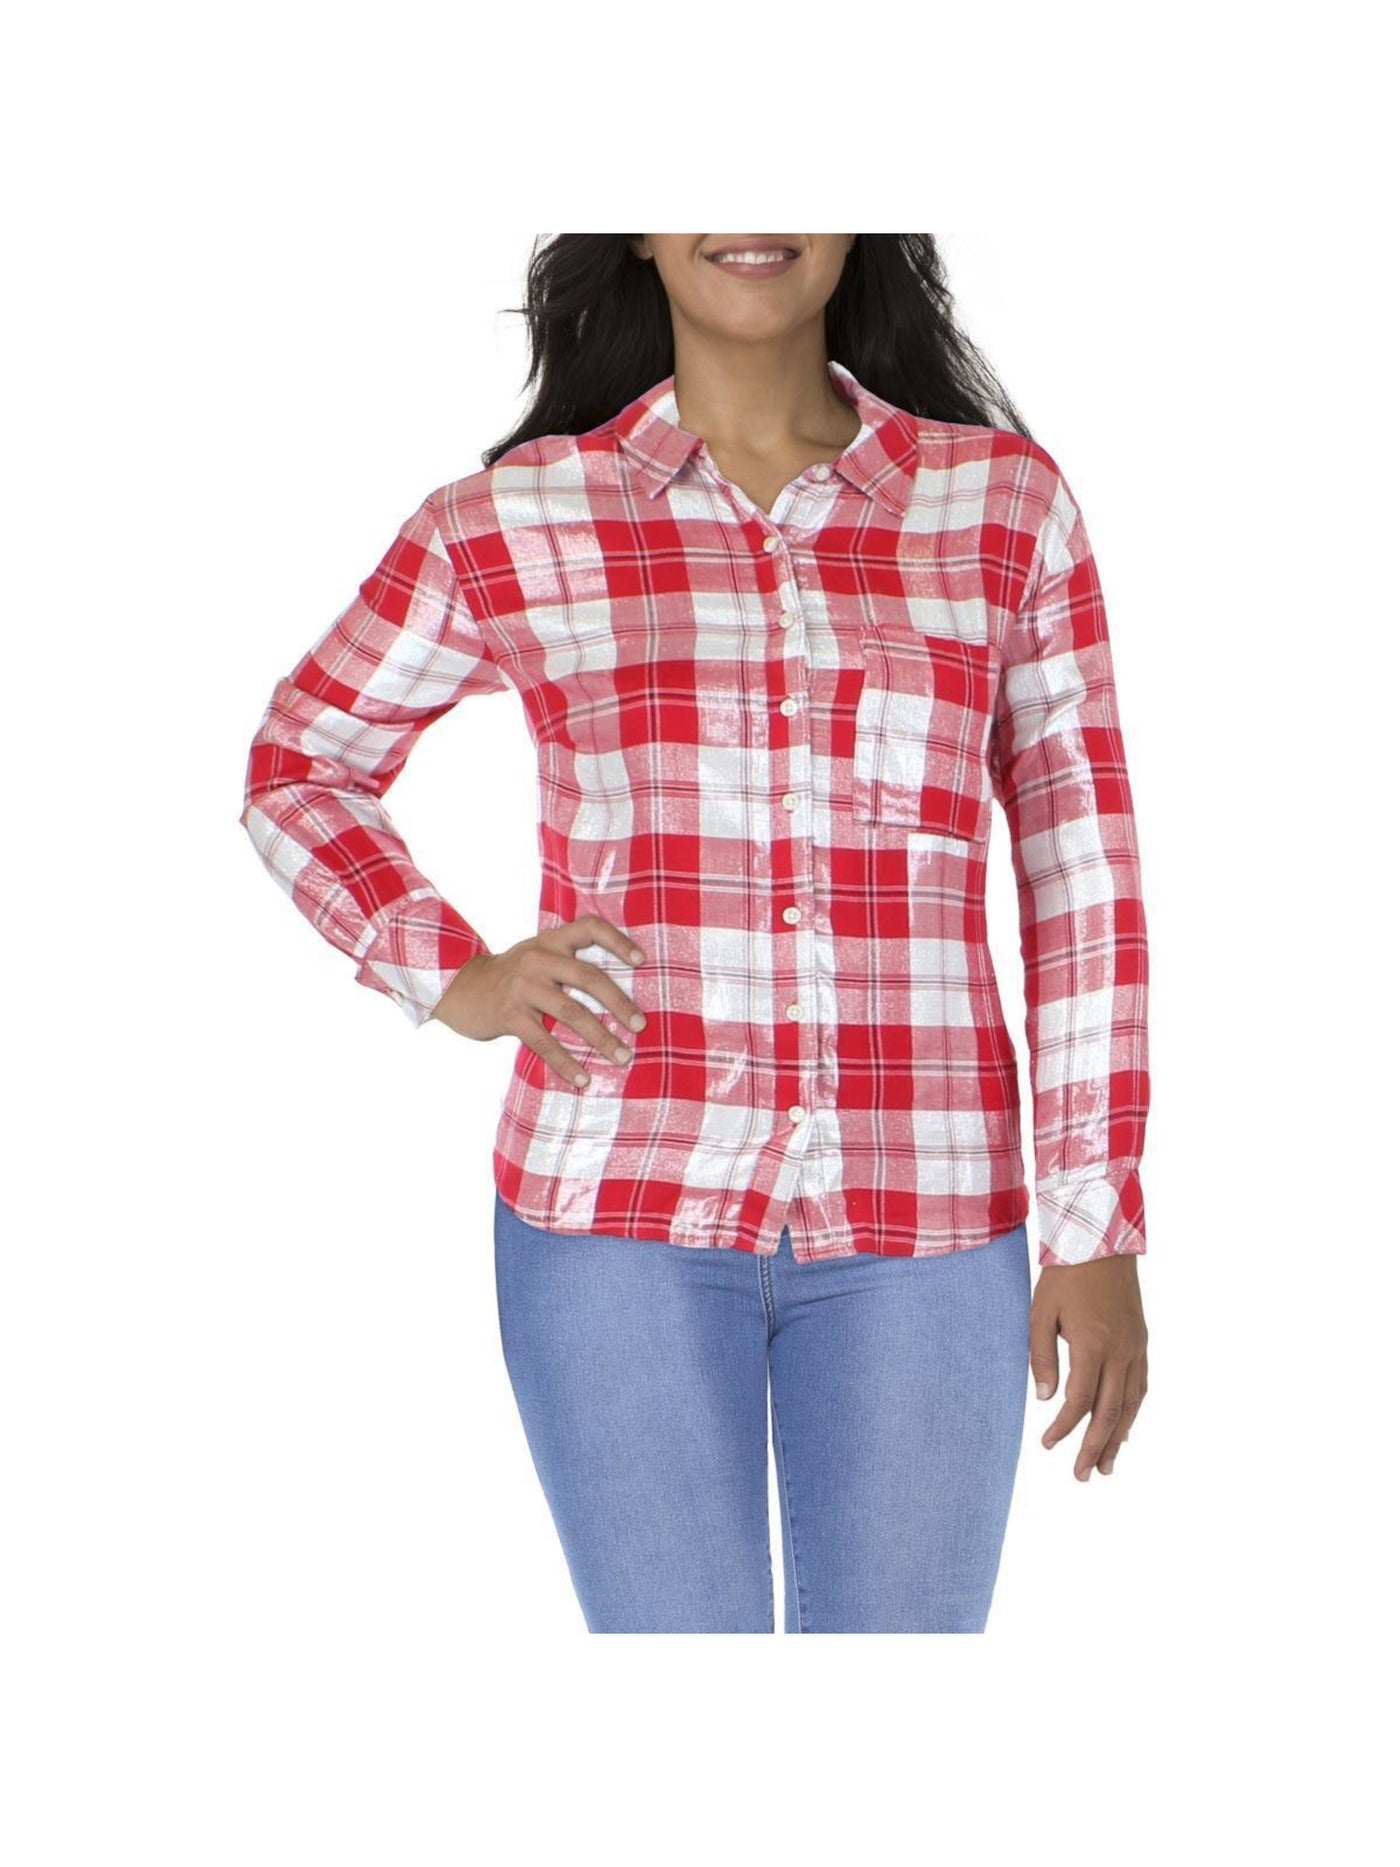 STYLE & COMPANY Womens Red Pocketed Metallic Plaid Cuffed Sleeve Point Collar Boyfriend Top Petites PP